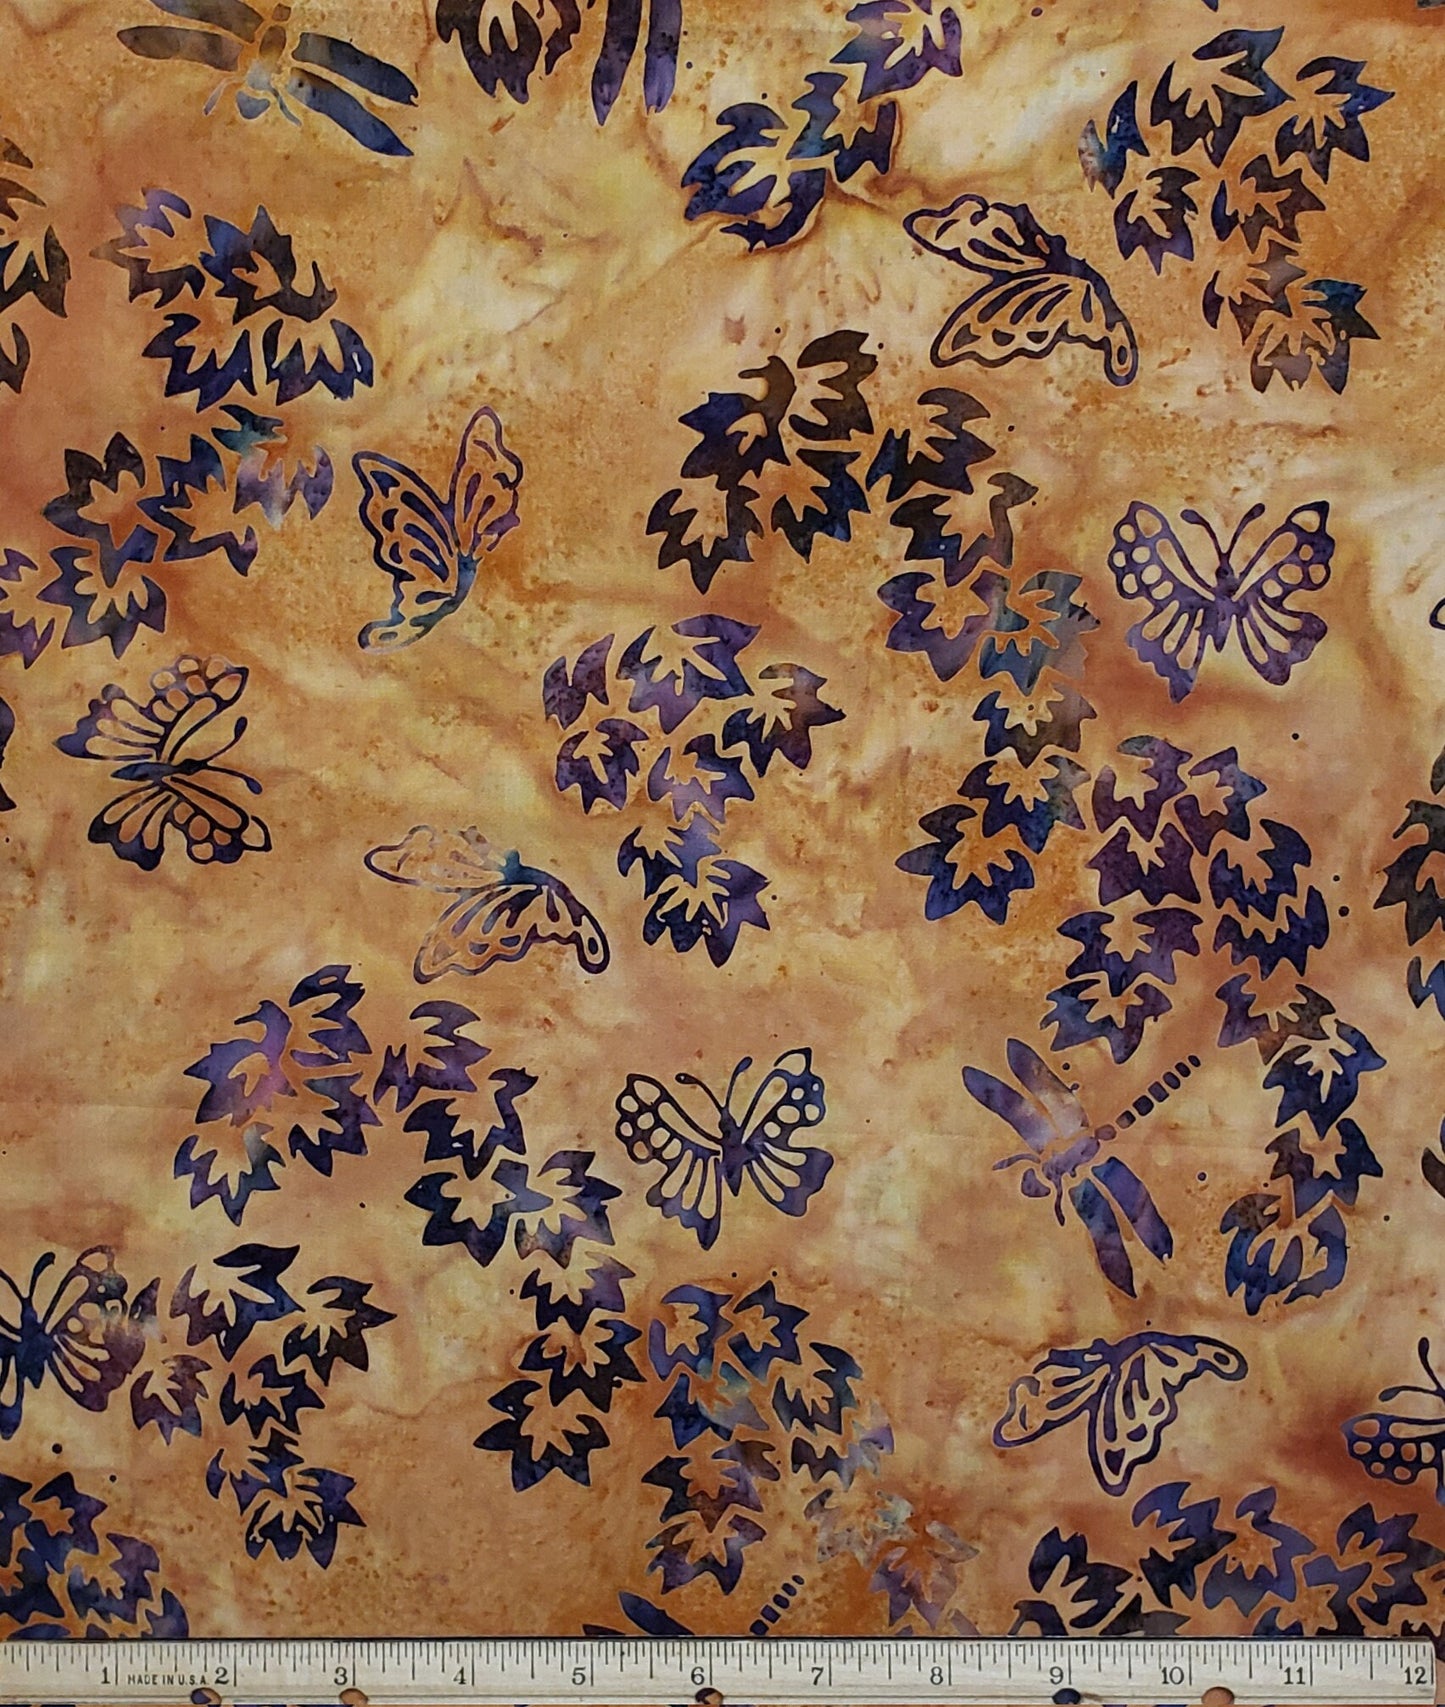 BATIK - Brown / Blue Leaf / Butterfly and Dragonfly Print